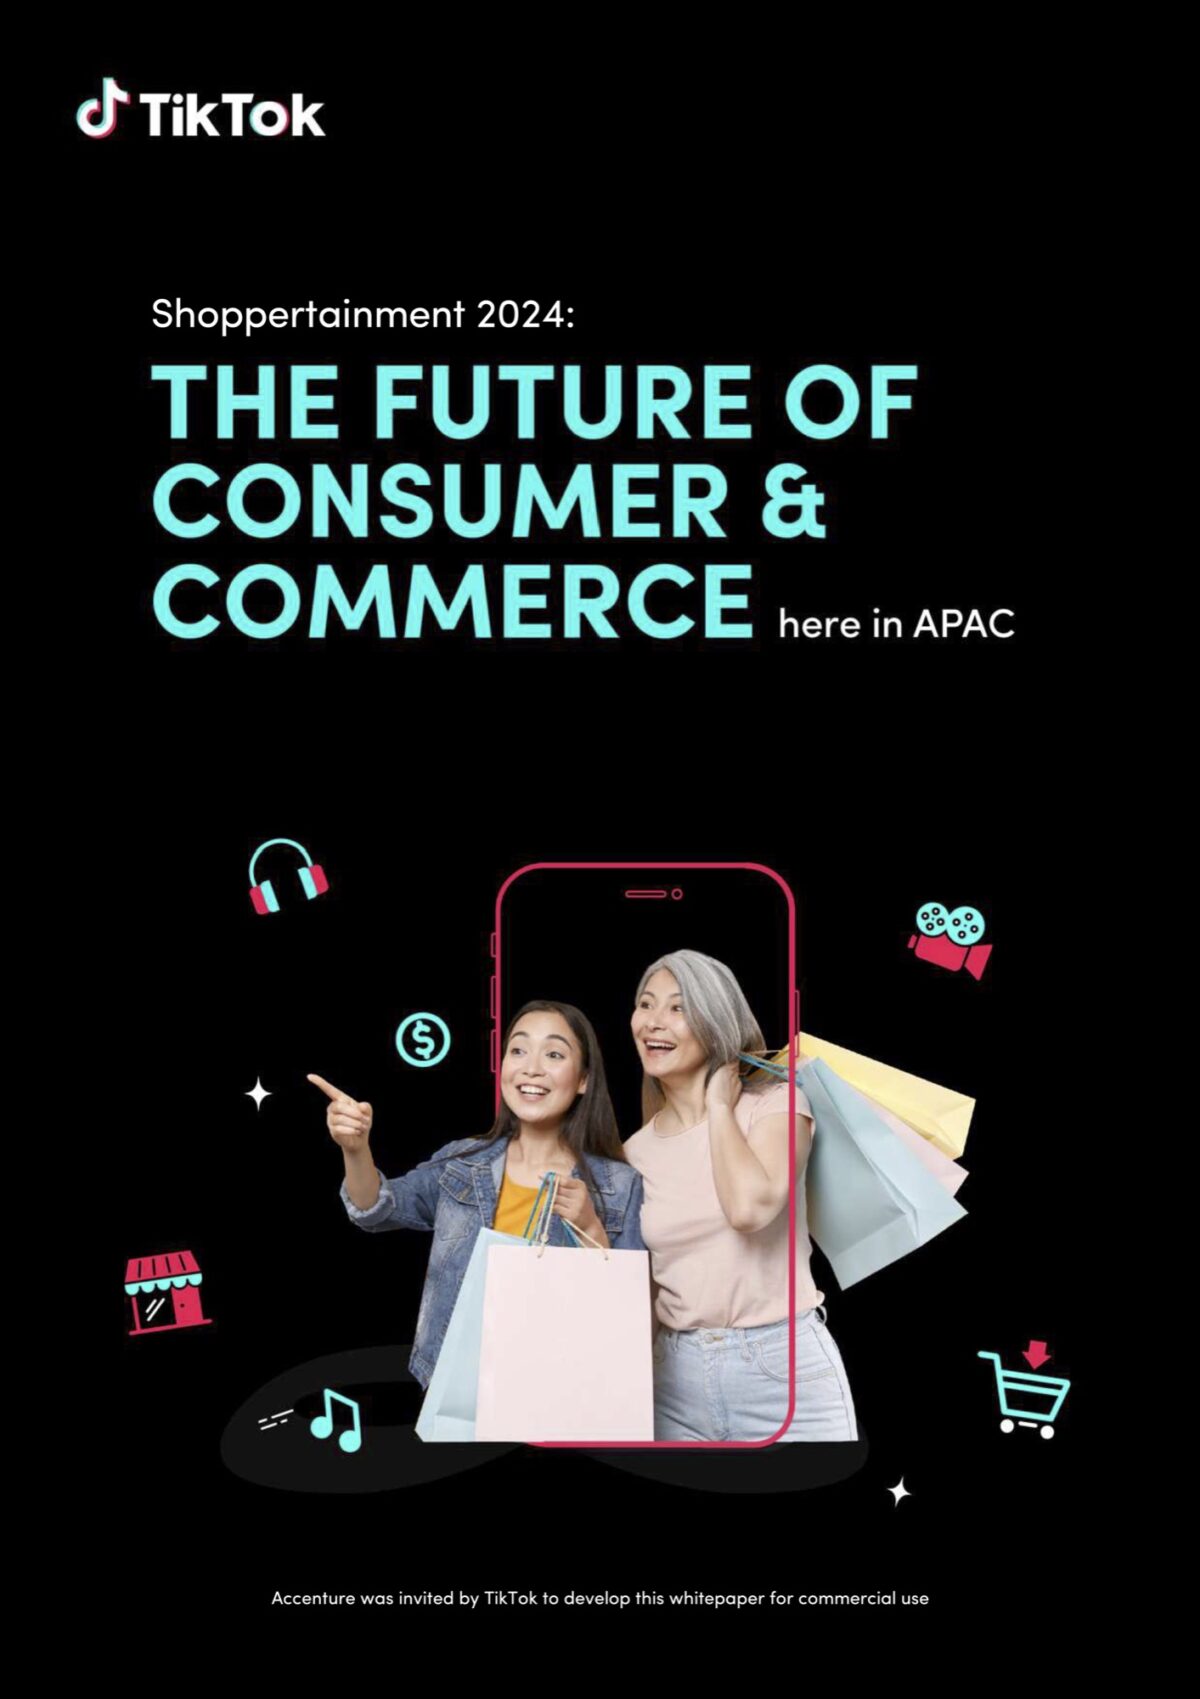 Shoppertainment 2024: THE FUTURE OF CONSUMER & COMMERCE here in APAC